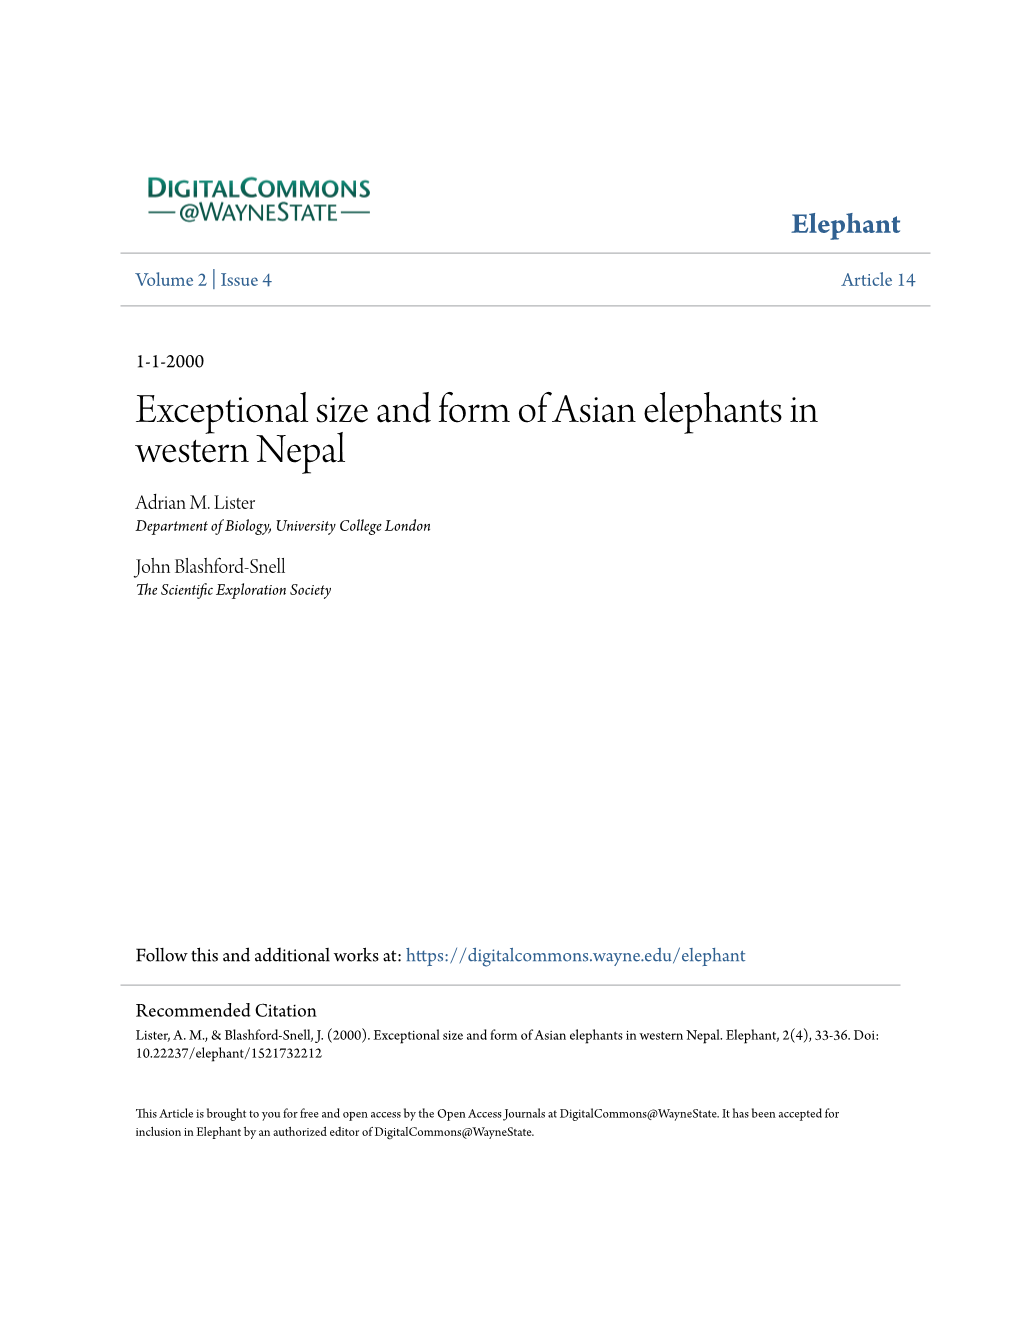 Exceptional Size and Form of Asian Elephants in Western Nepal Adrian M